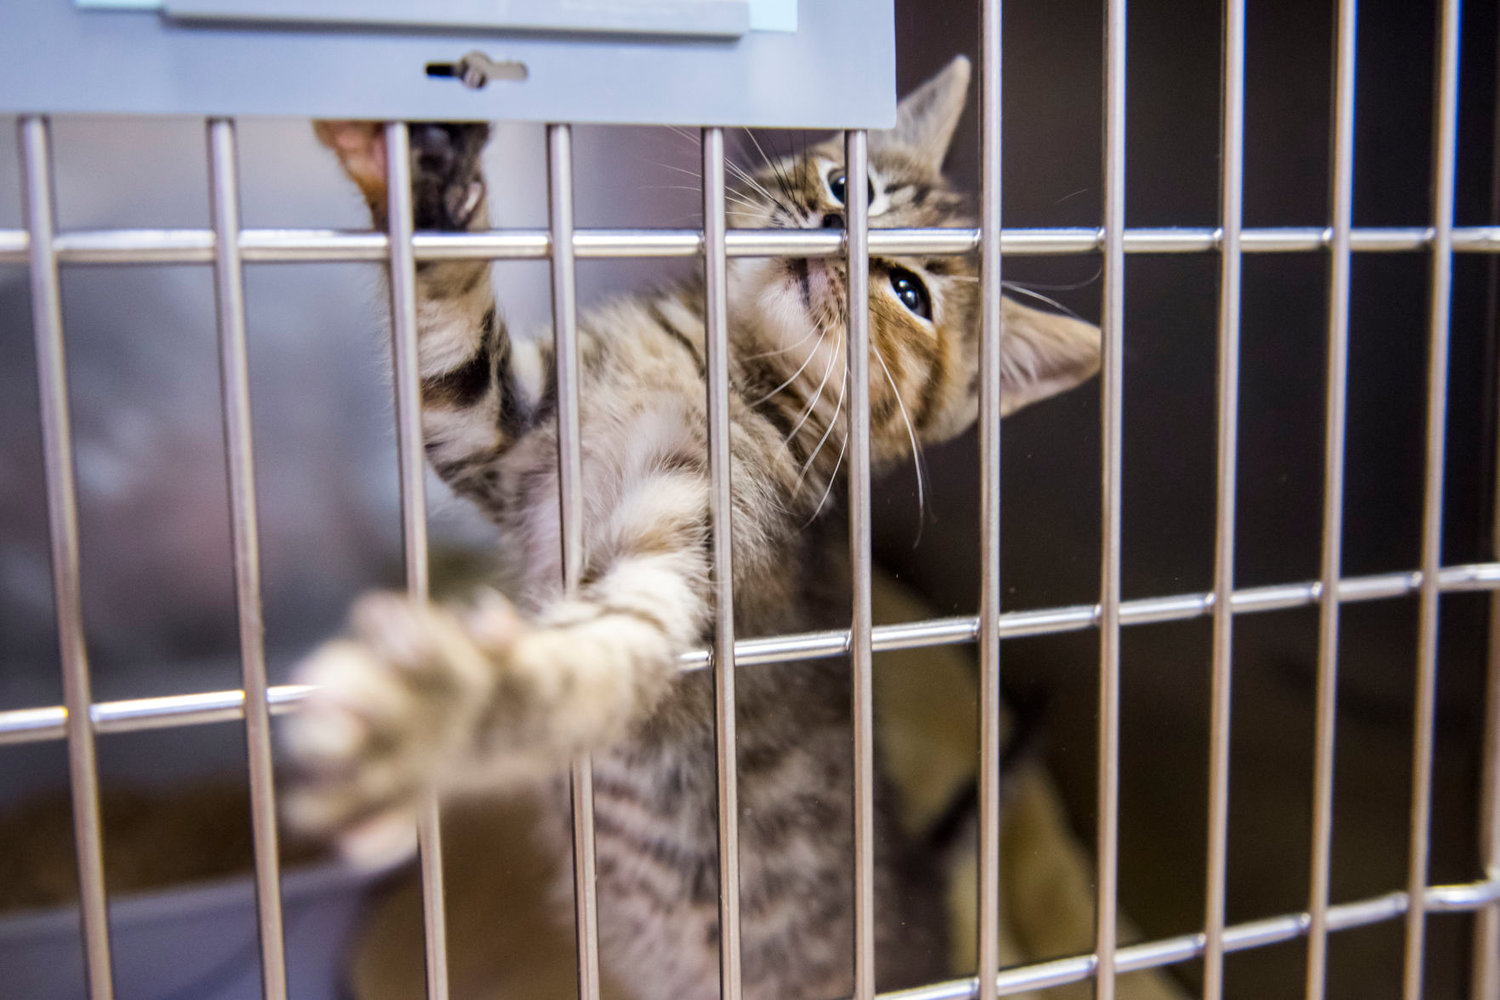 A kitten puts his paw on a cage during a visit at the Lewis County Animal Shelter in Chehalis in February 2020.